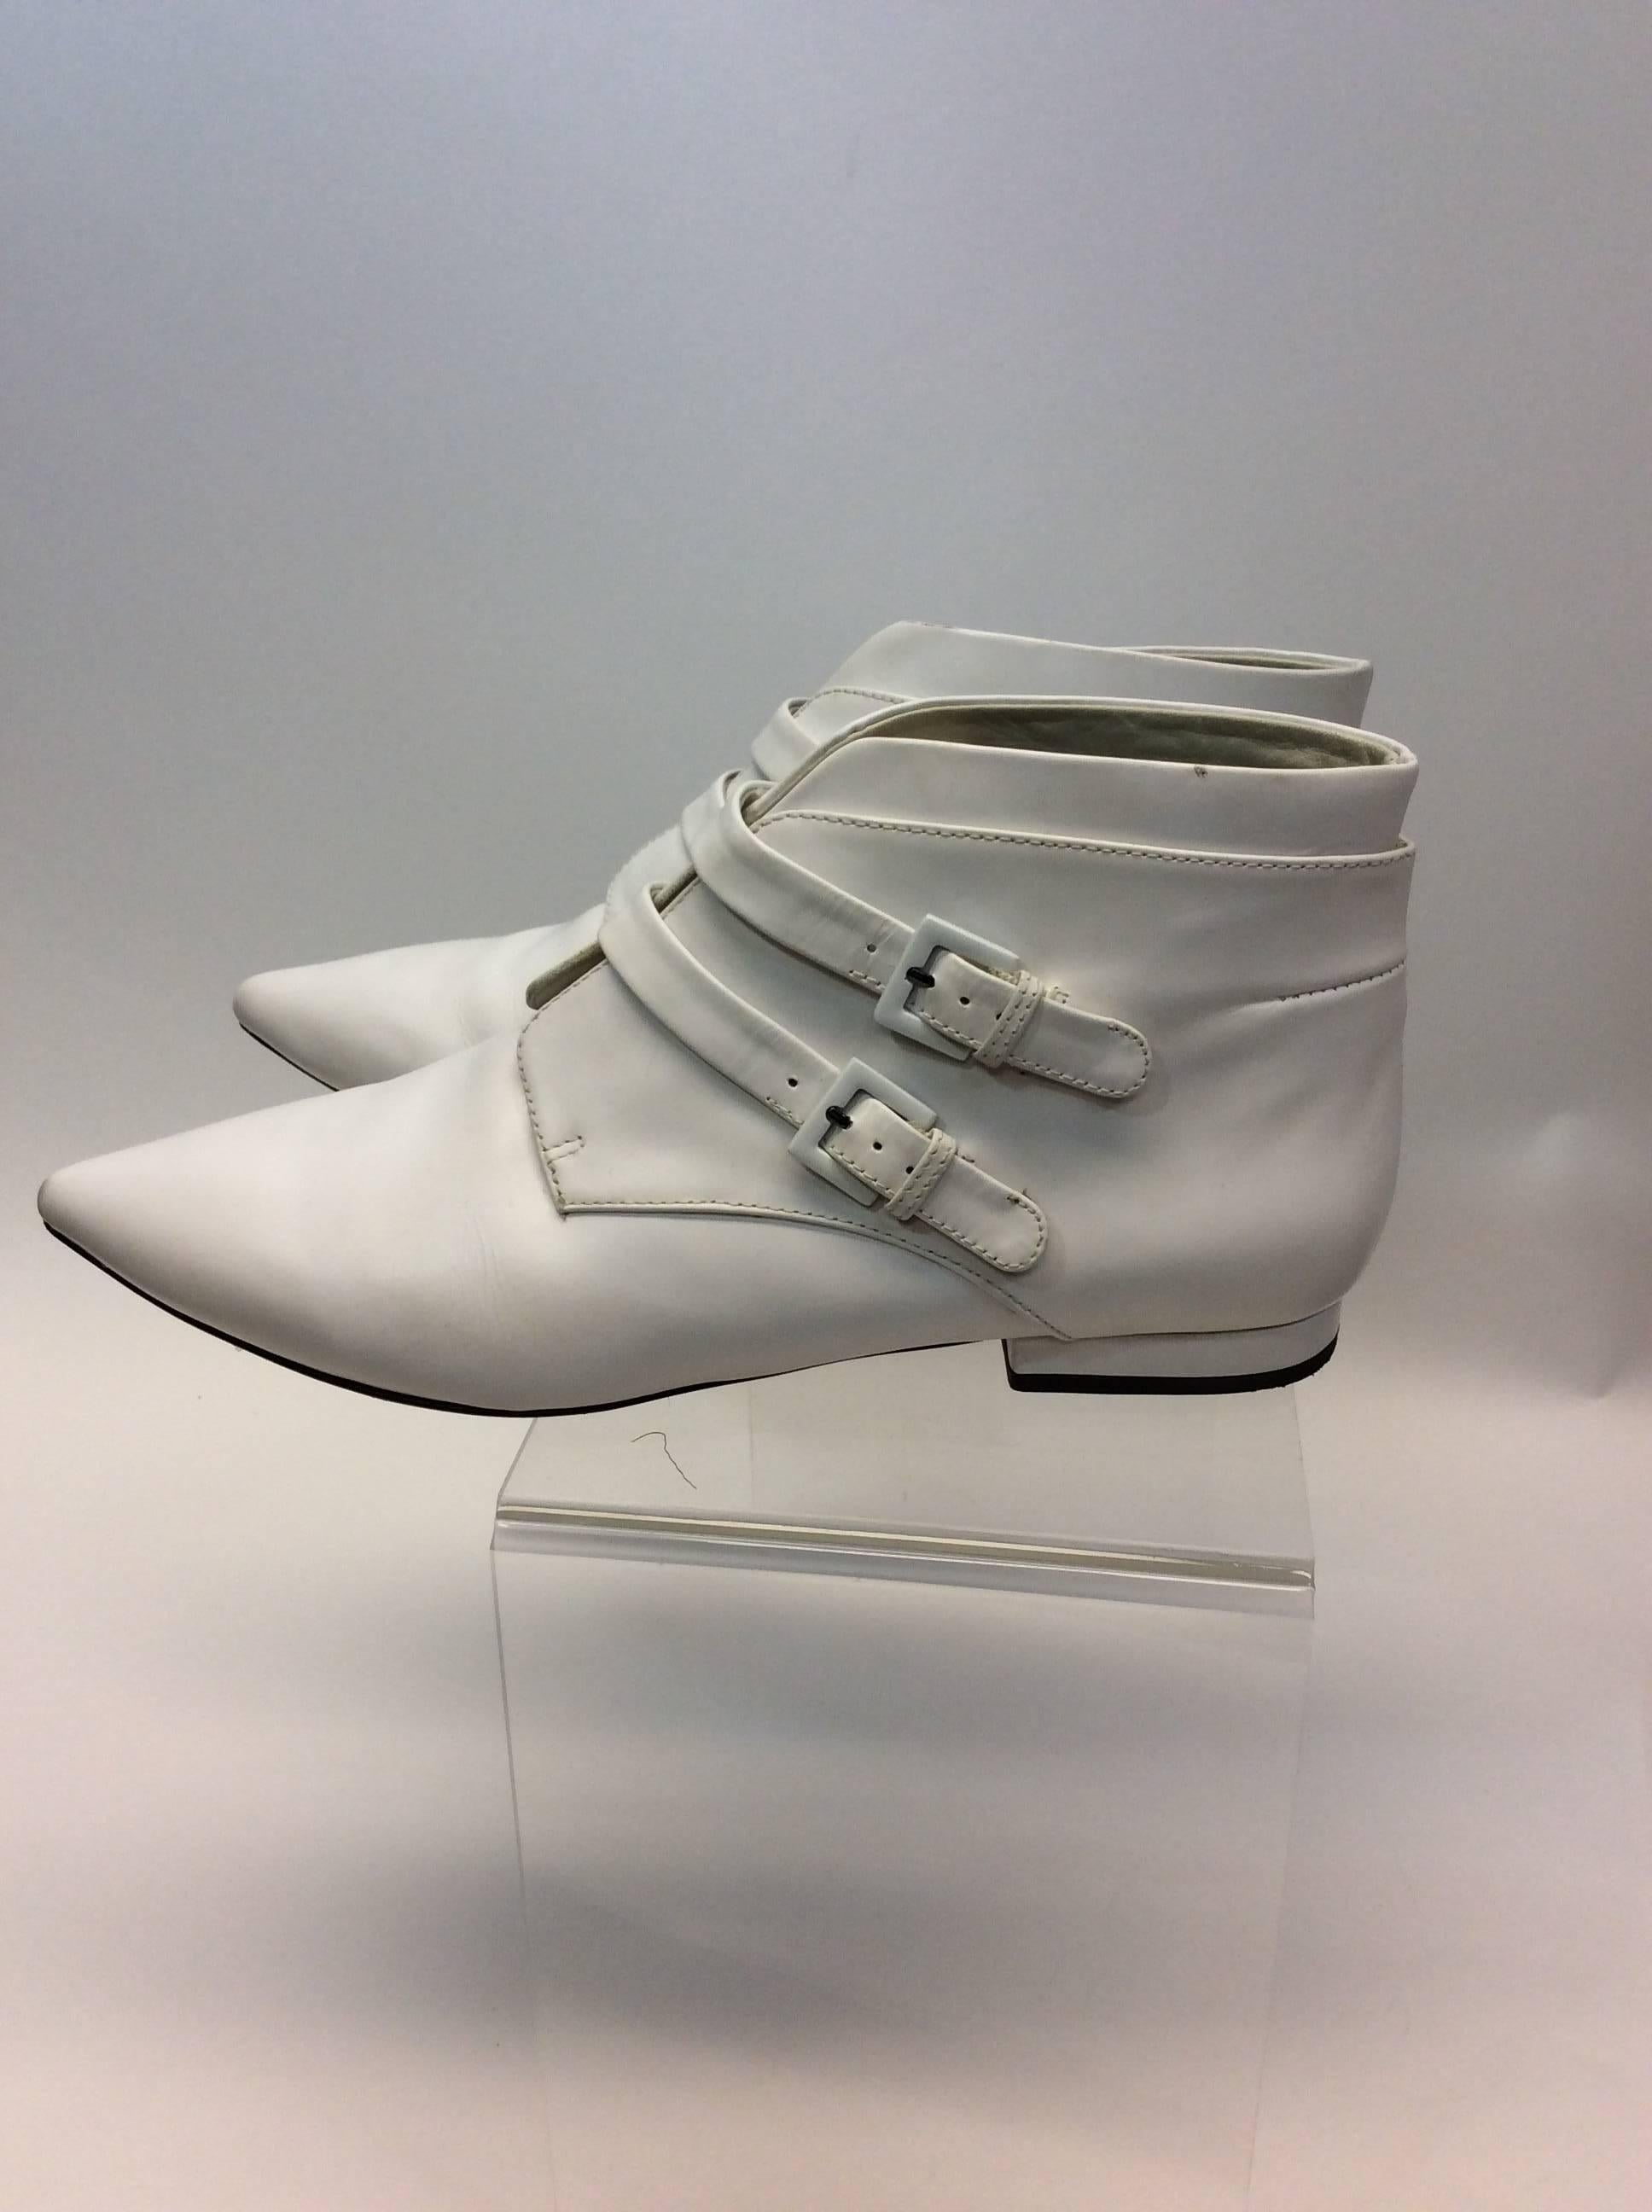 Jil Sander White Ankle Boots 
Size 39.5
$150
Made in China
Slight wear on toes
Buckle detailing